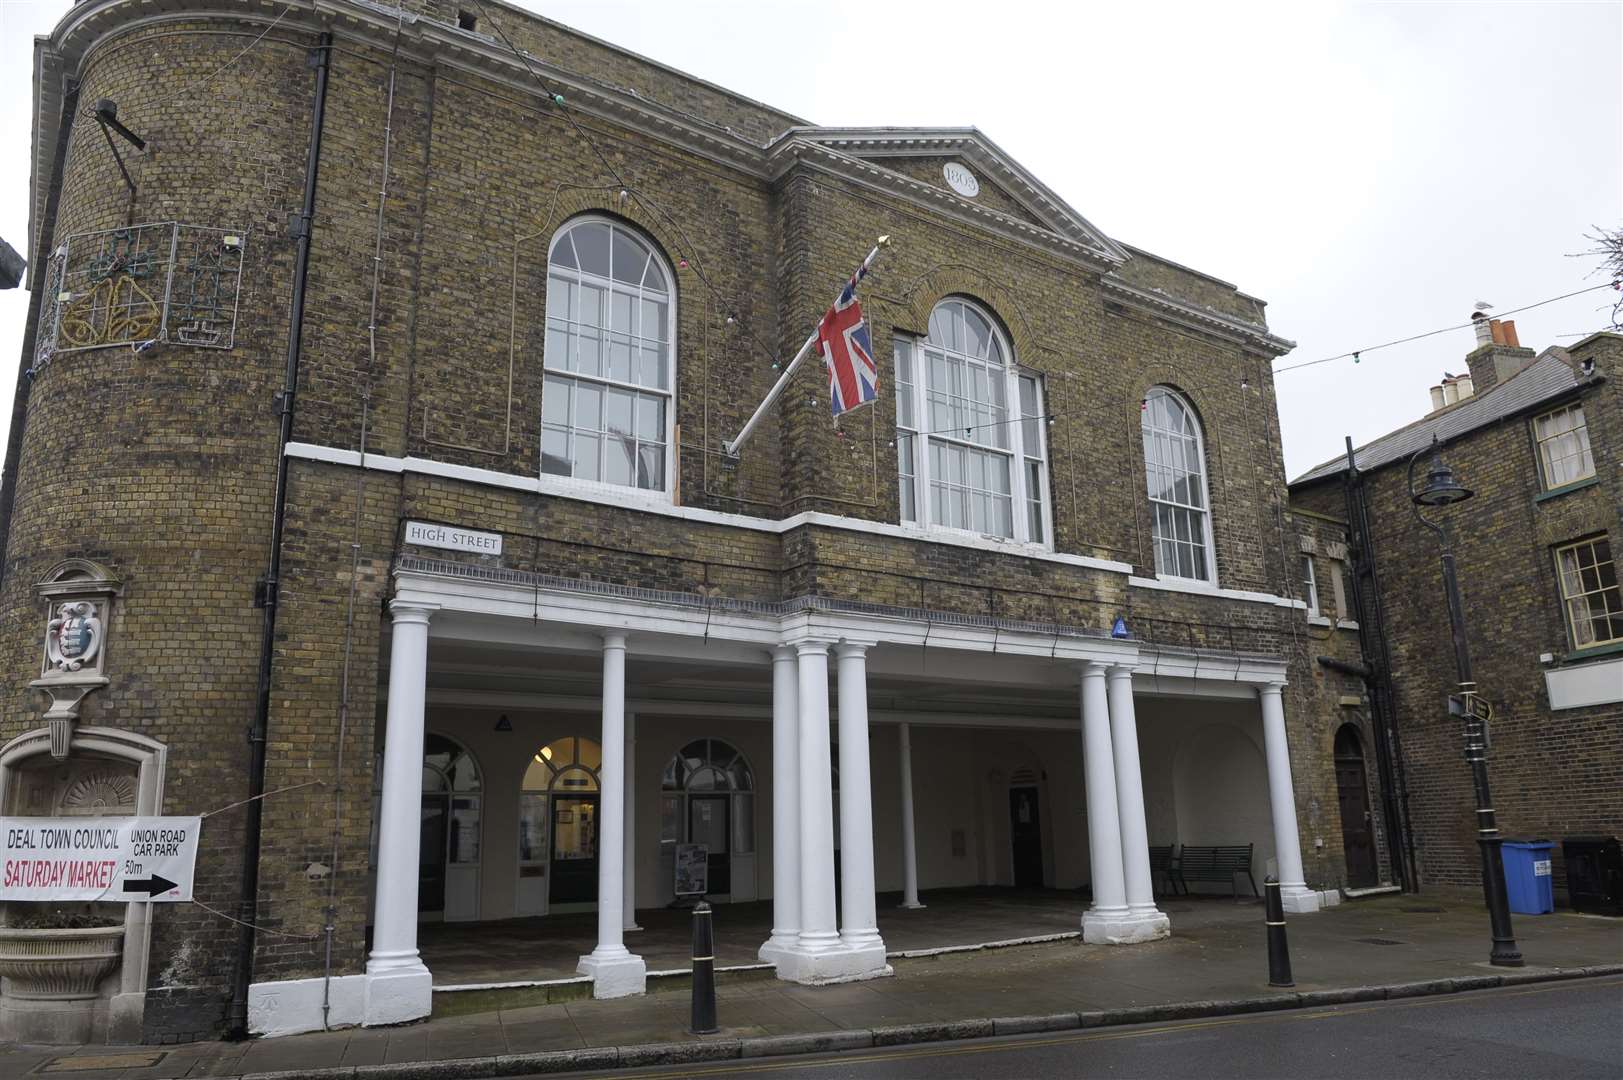 Deal Town Hall, the town council's base.